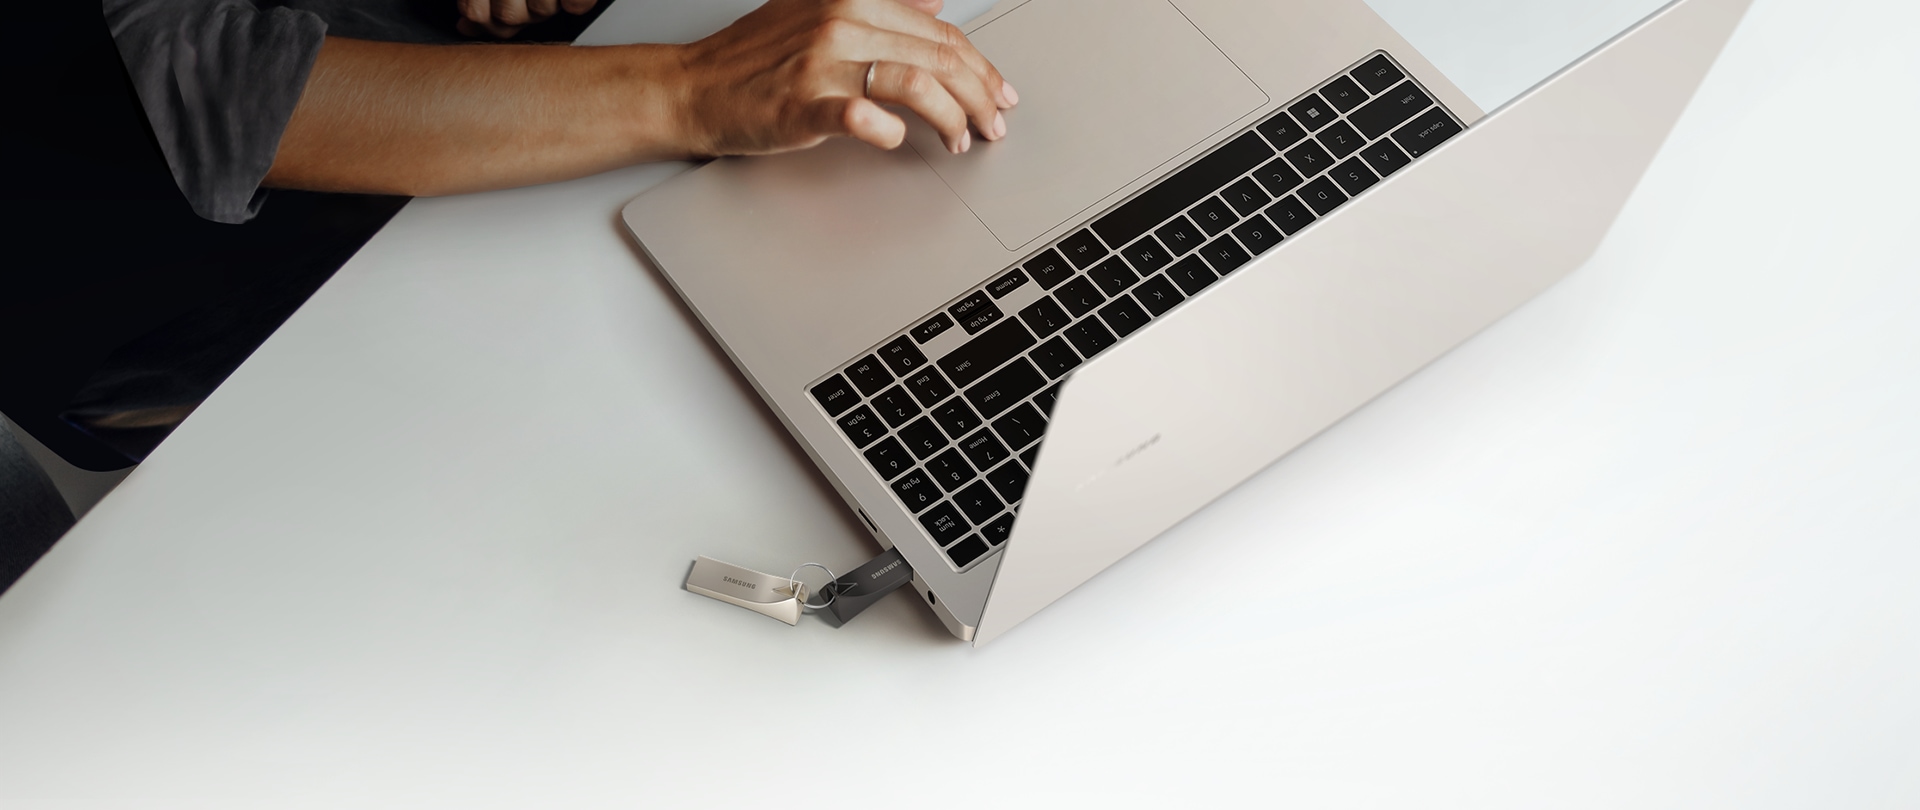 The BAR Plus is plugged into the laptop, and one more is connected via a key ring.